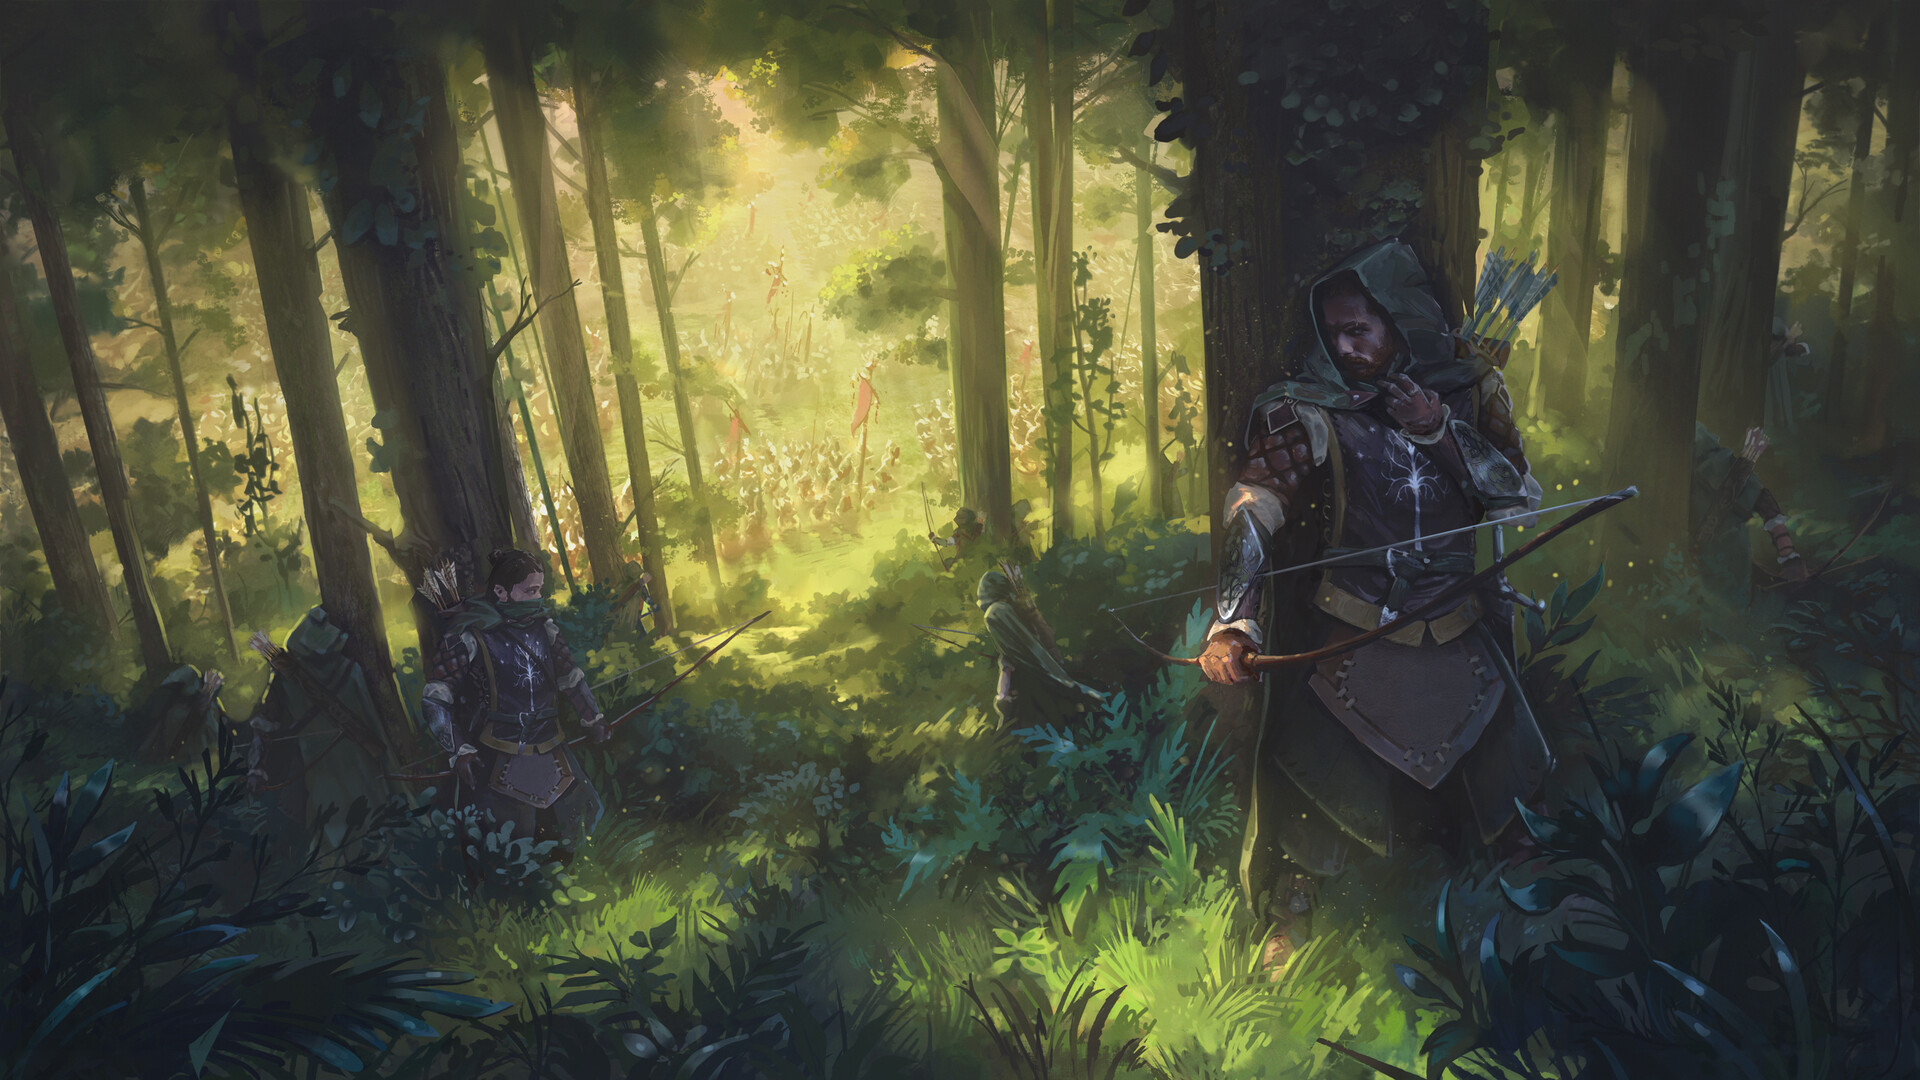 General 1920x1080 Nikolay Timofeev drawing archer forest army hoods bow and arrow The Lord of the Rings